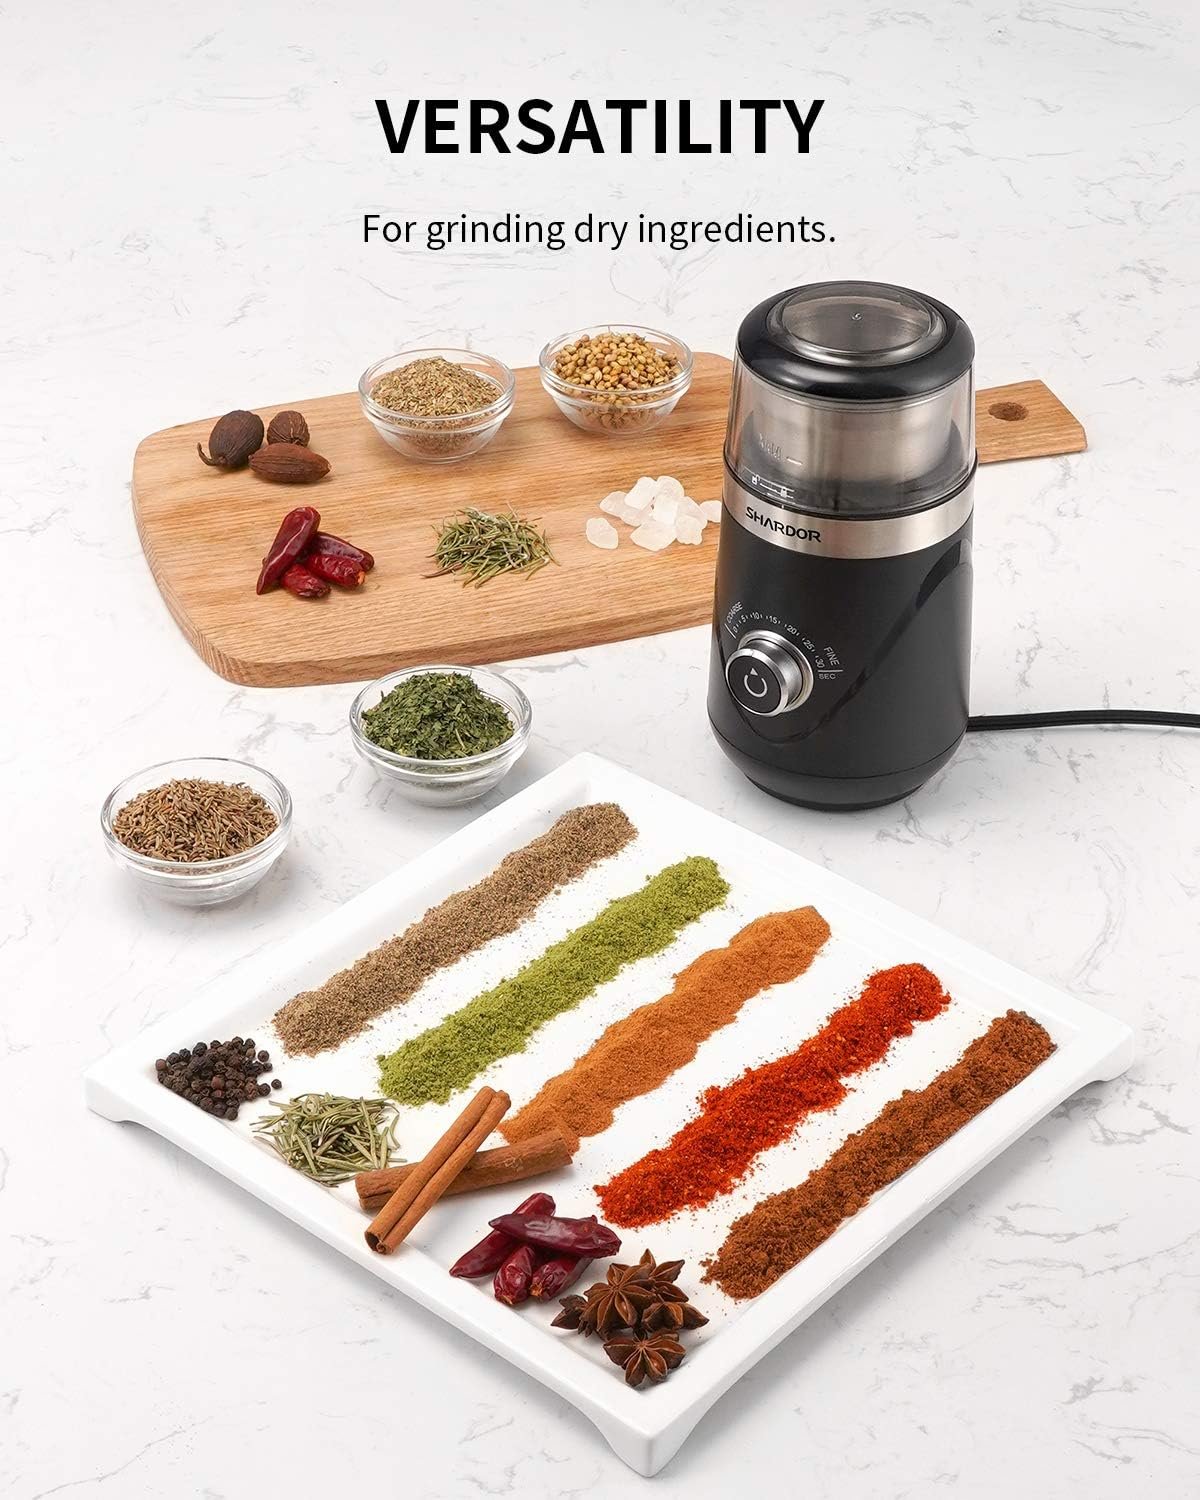 5 SHARDOR Electric Coffee Grinder with Adjustable Settings and Stainless Steel Bowl for Grinding Beans, Spices, and Nuts, in Sleek Black